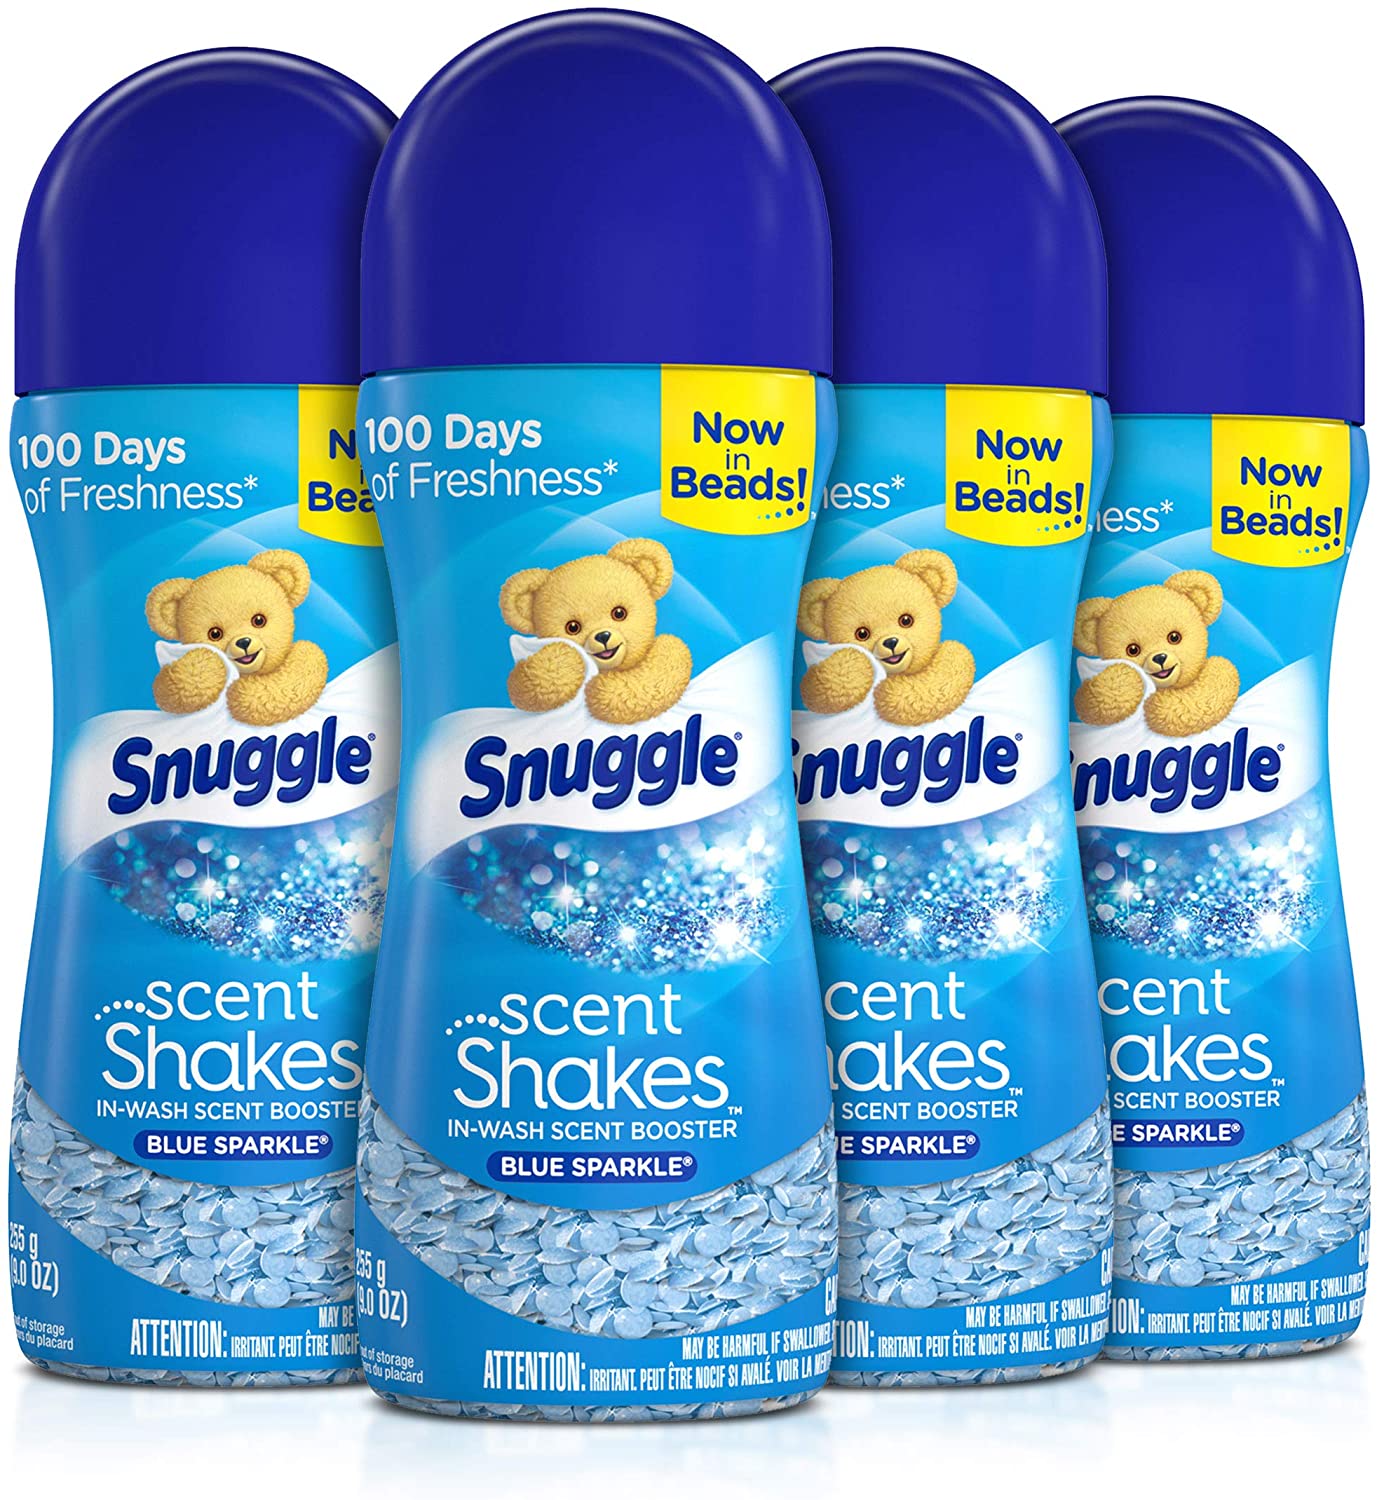 Snuggle Scent Shakes in-Wash Scent Booster Beads 4PK $10.45 SHIPPED